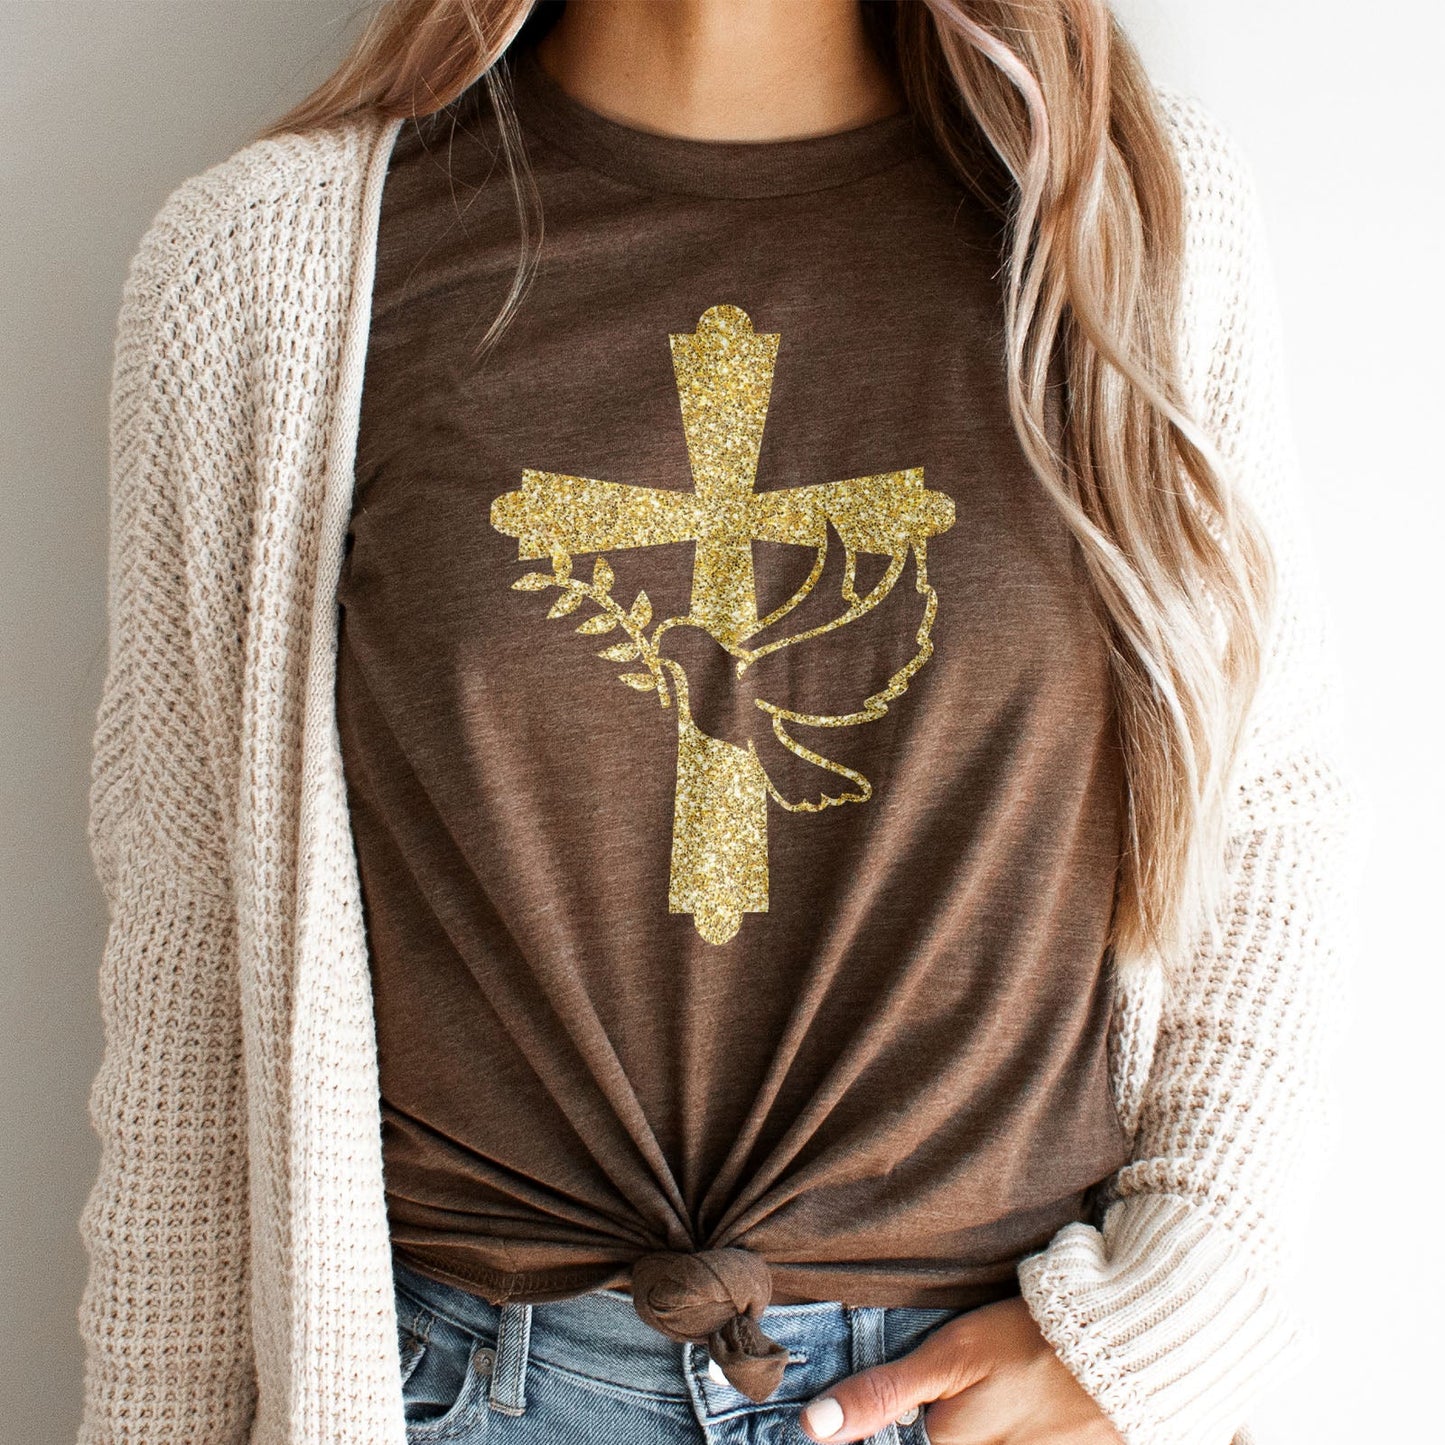 Dove of Peace Tee Shirts For Women - Christian Shirts for Women - Religious Tee Shirts